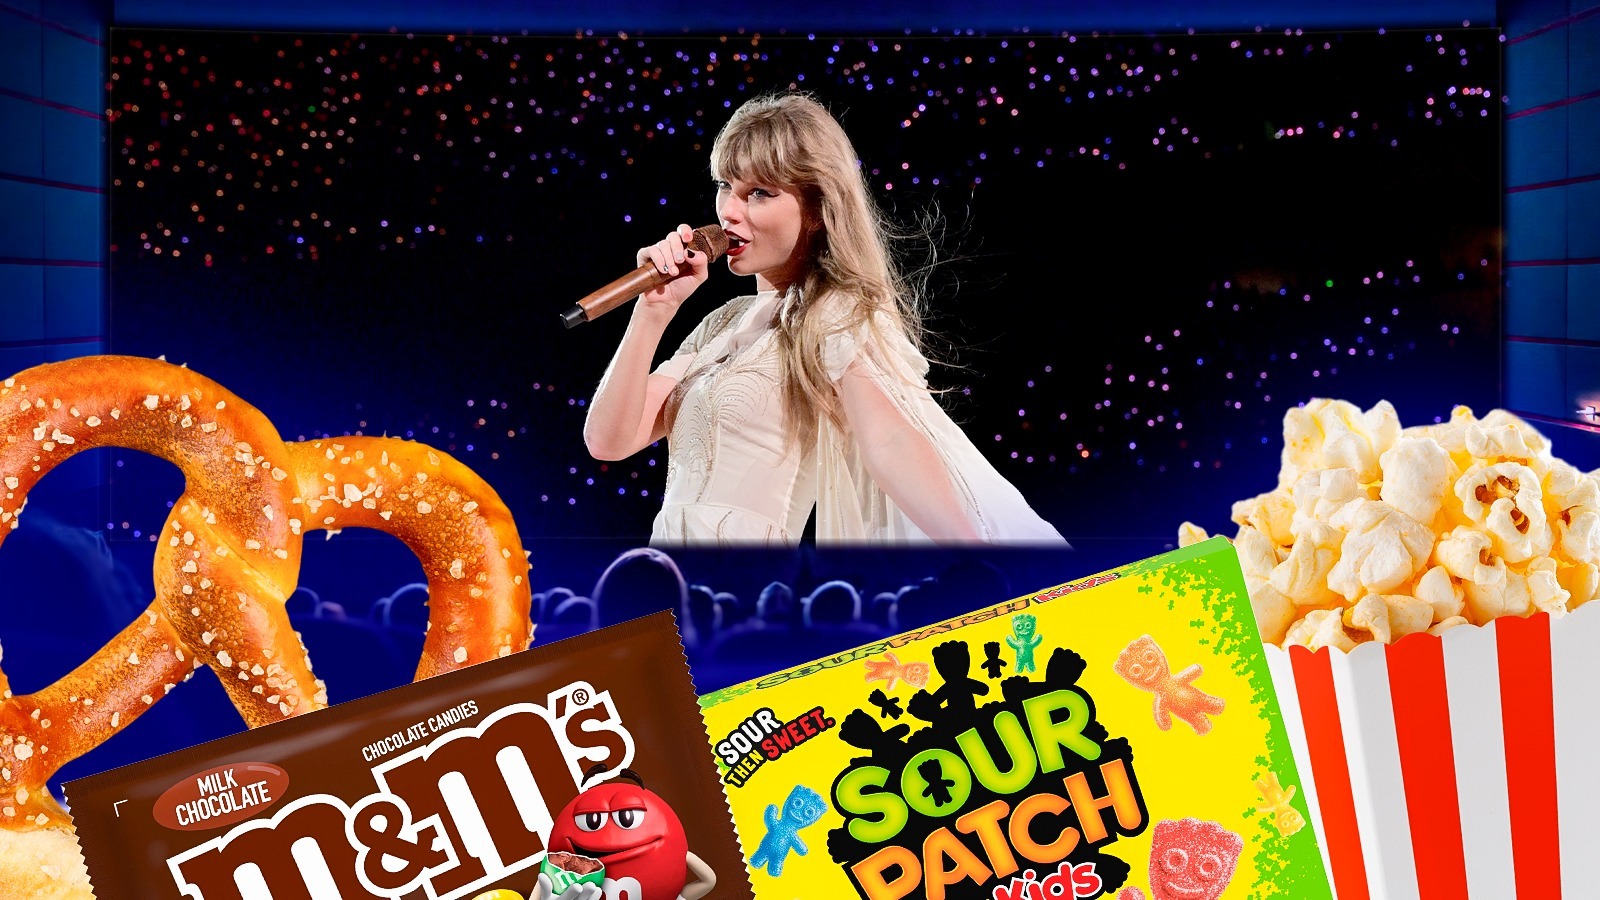 https://www.tastingtable.com/img/gallery/the-11-best-concessions-to-eat-and-drink-while-watching-taylor-swifts-eras-tour-concert-film/l-intro-1695841596.jpg